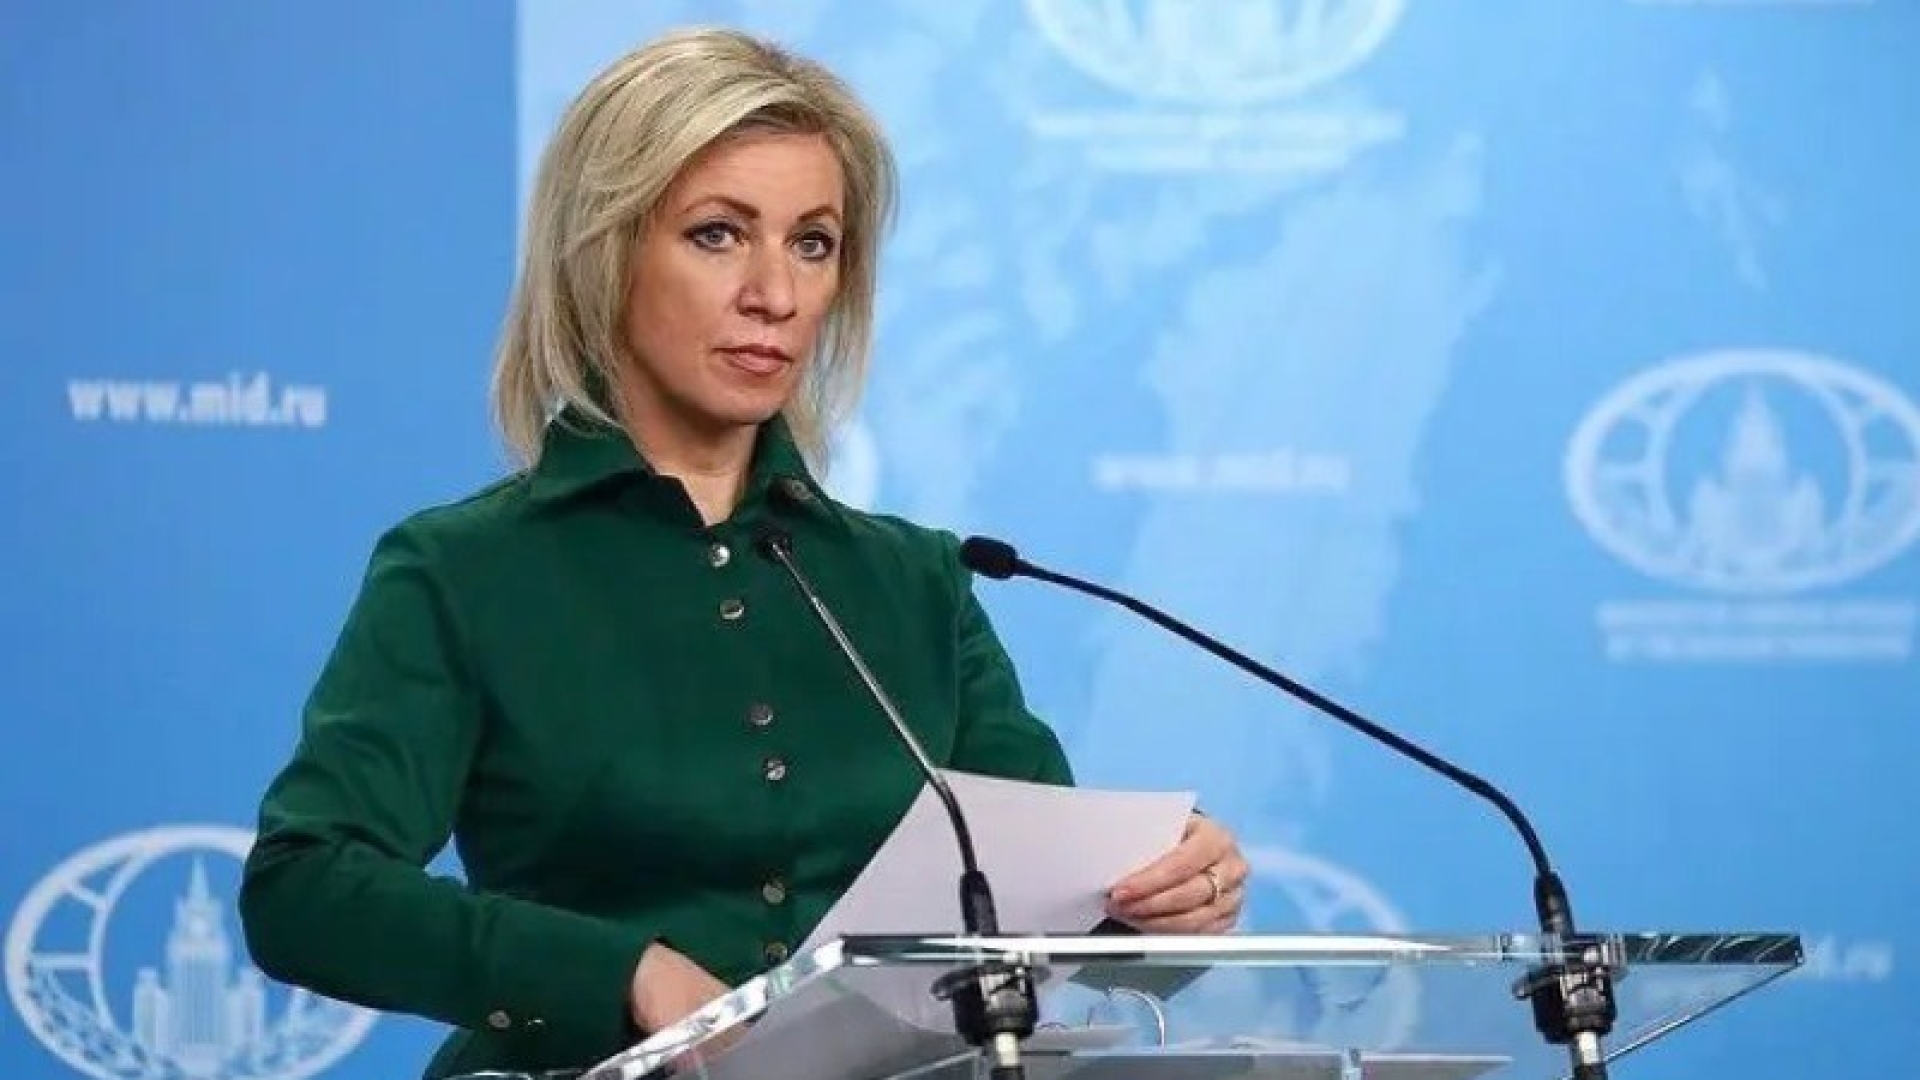 Zakharova: "Truth and justice on the side of Russia and its people"